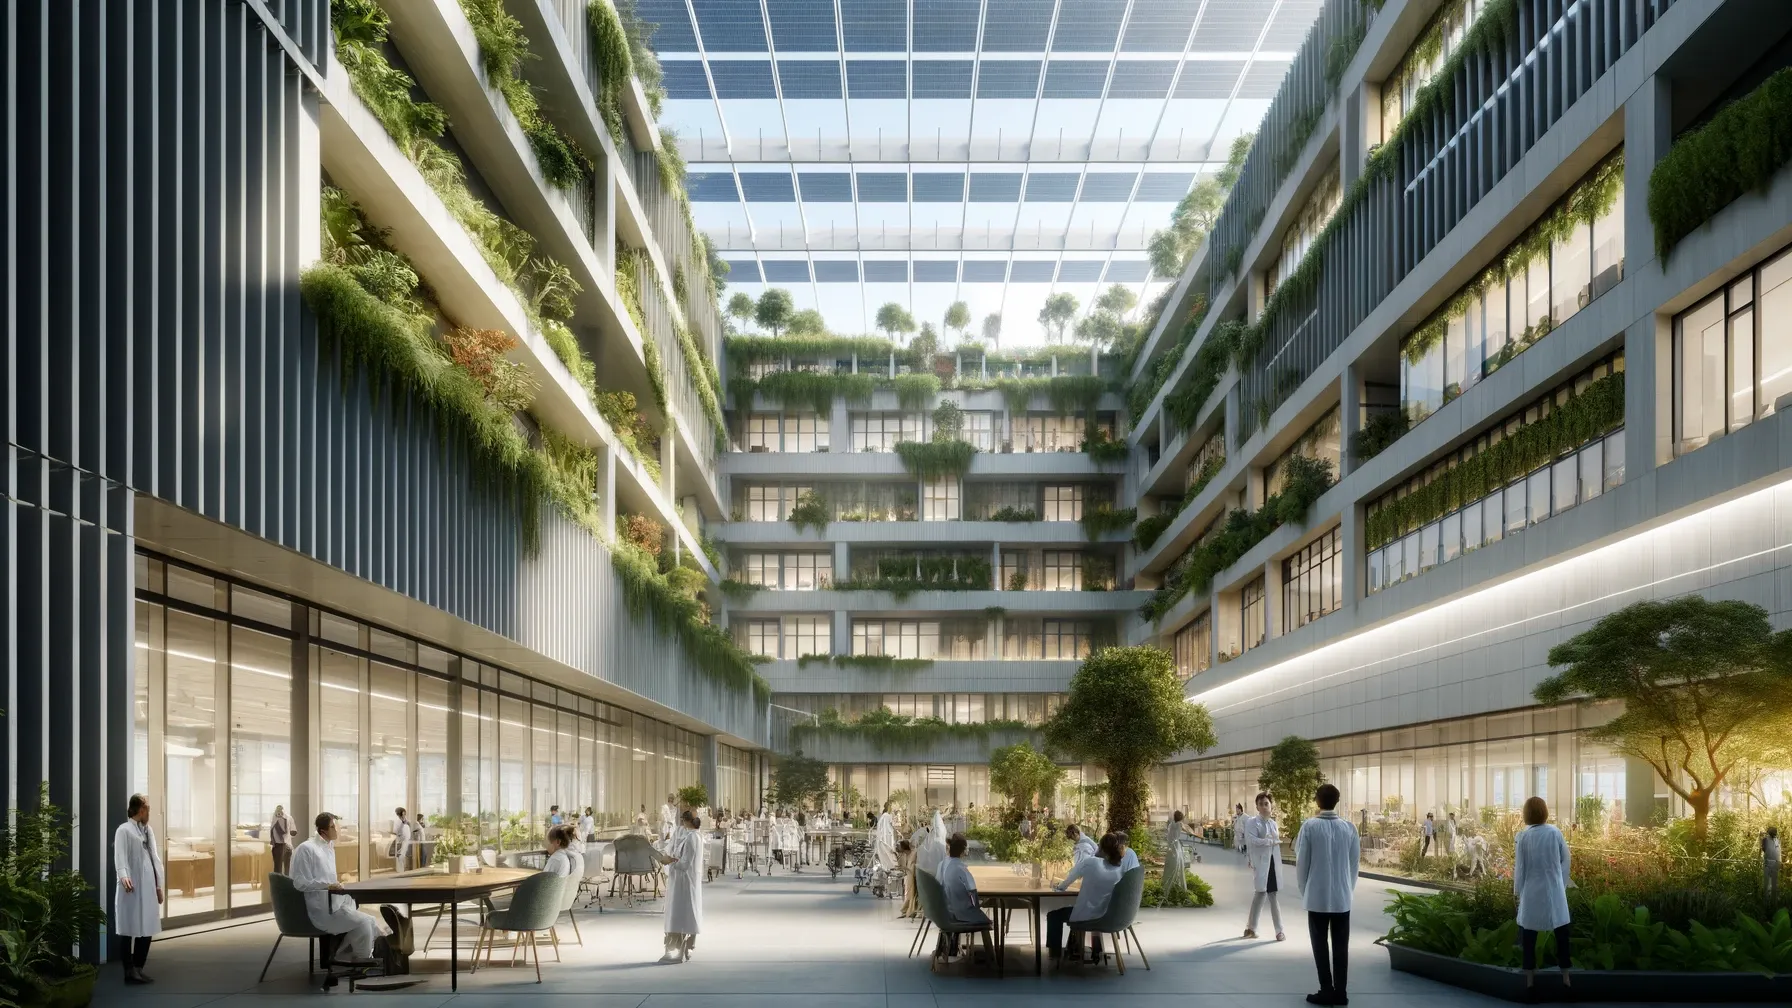 A modern hospital complex with extensive biophilic design elements